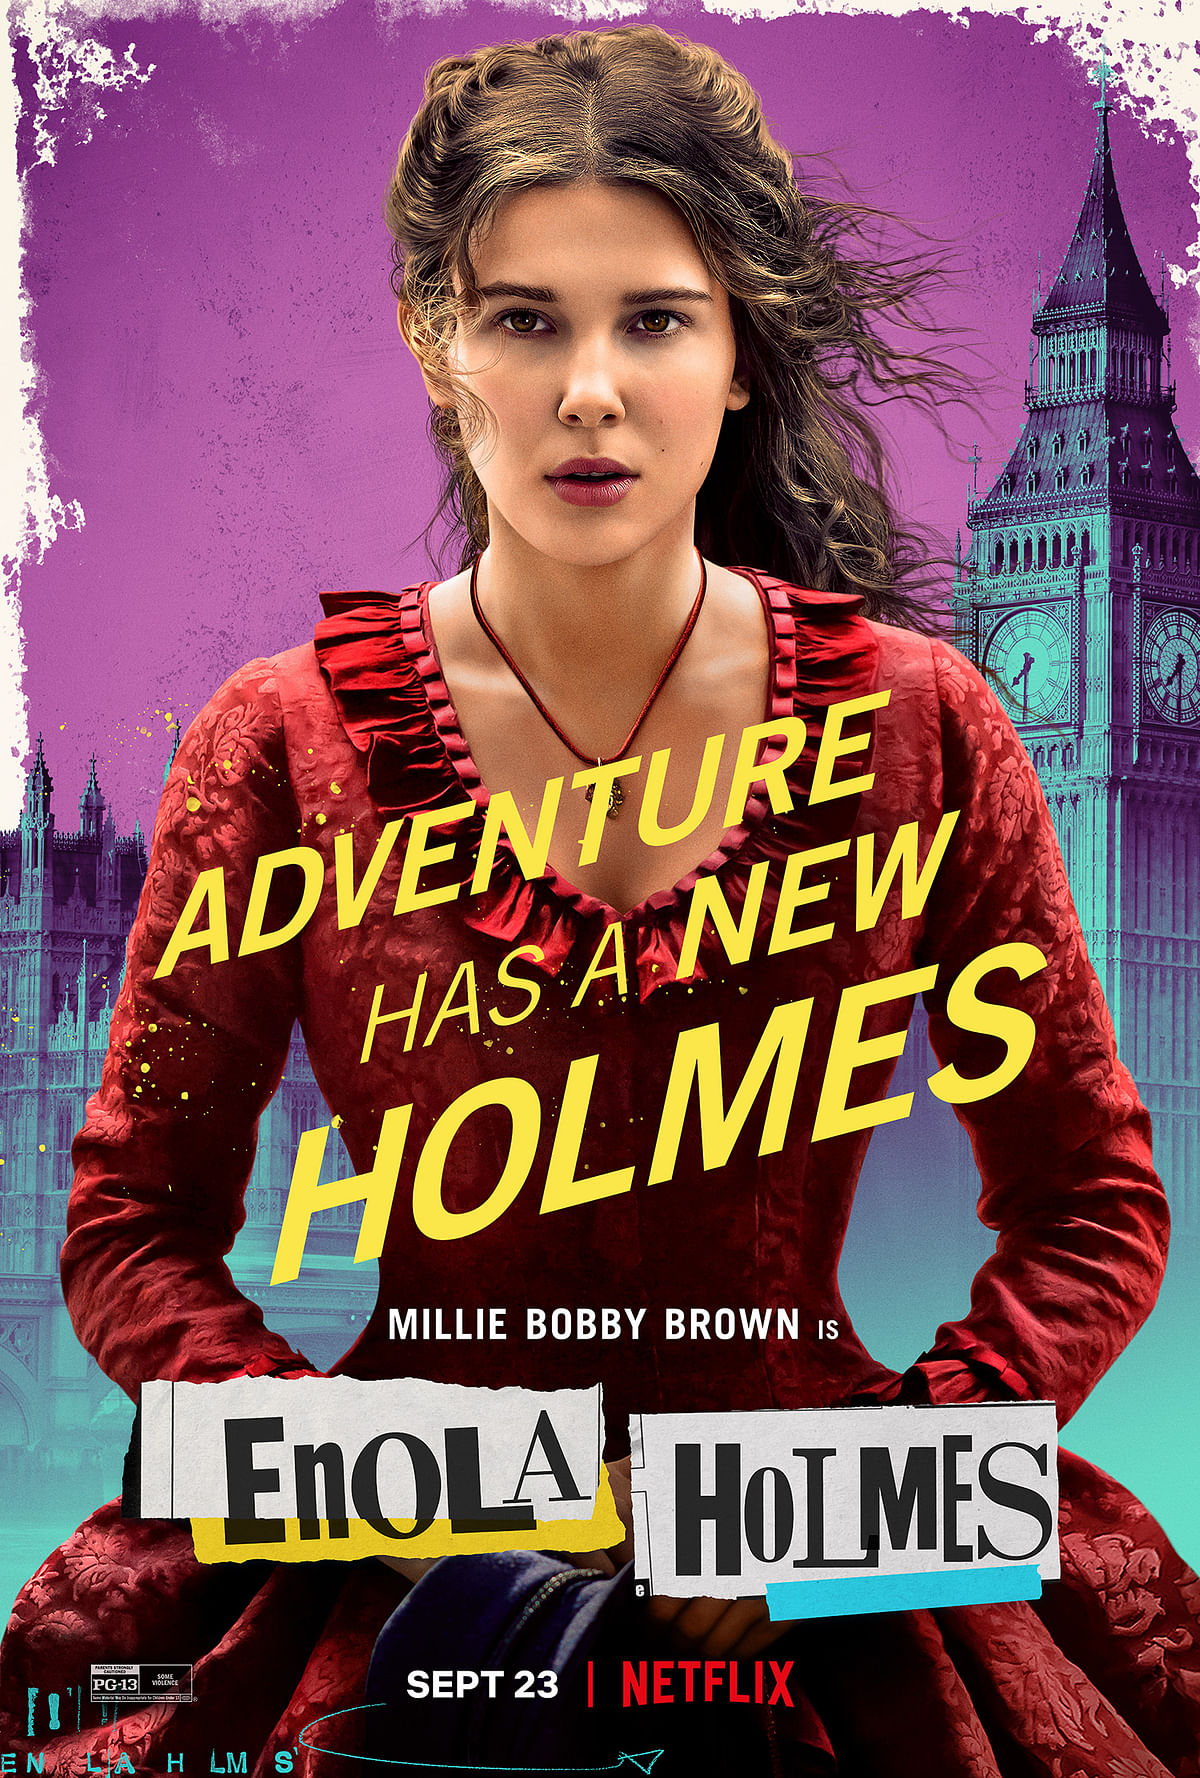 'Enola Holmes' will start streaming on Netflix from 23 September.